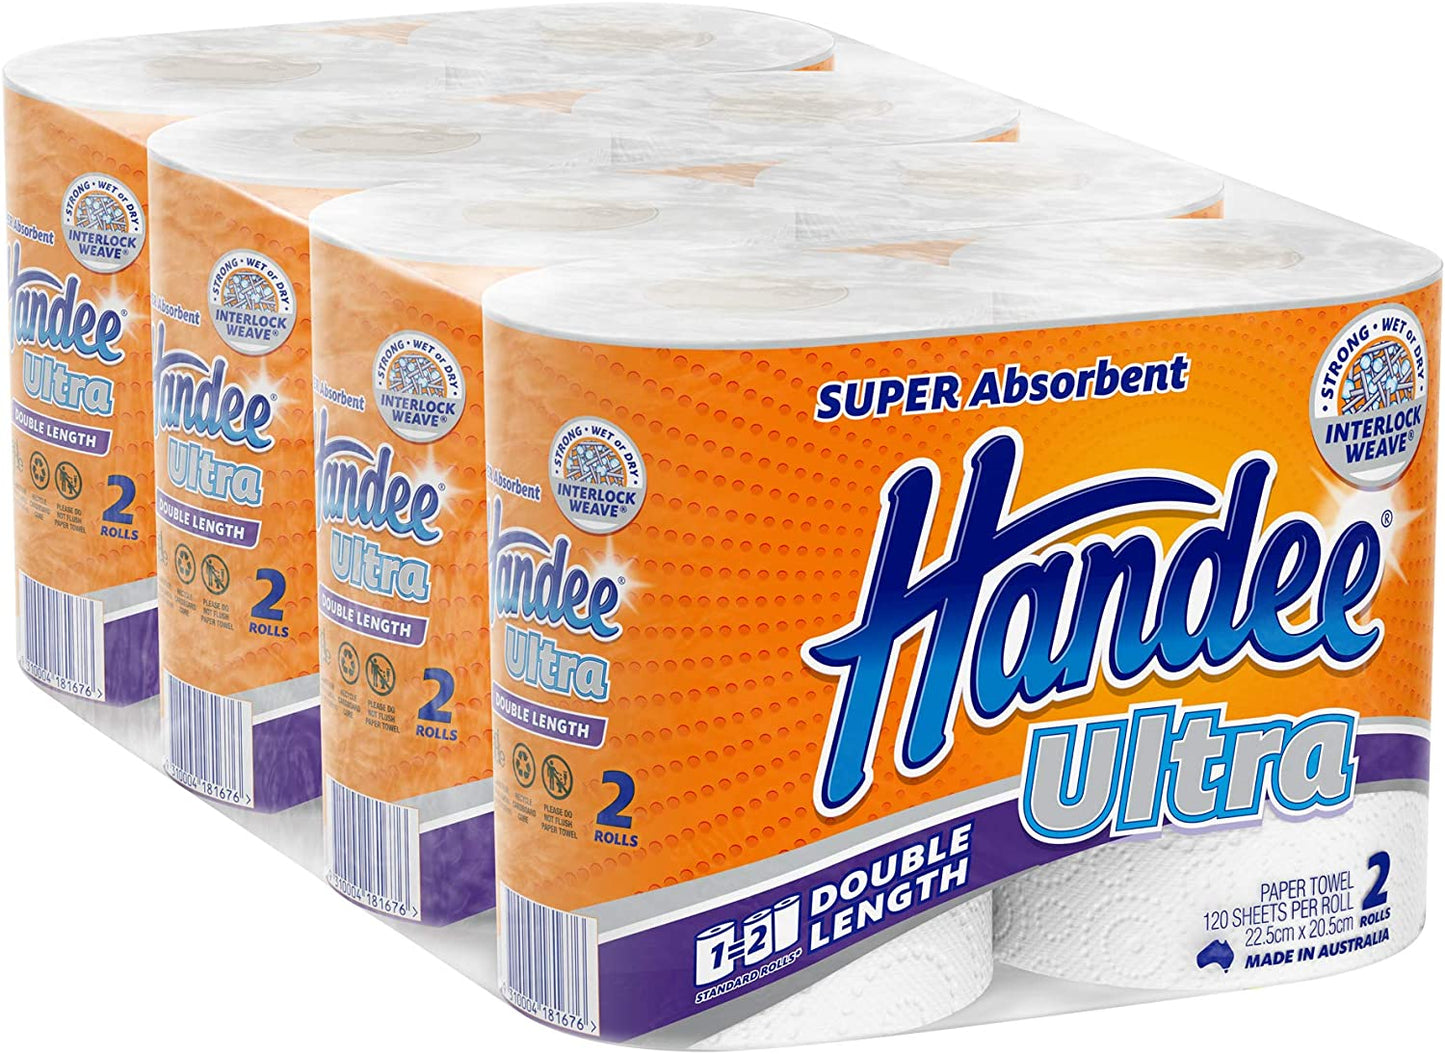 Handee Ultra Double Length Paper Towel (120 Sheets per roll), White 8 Rolls